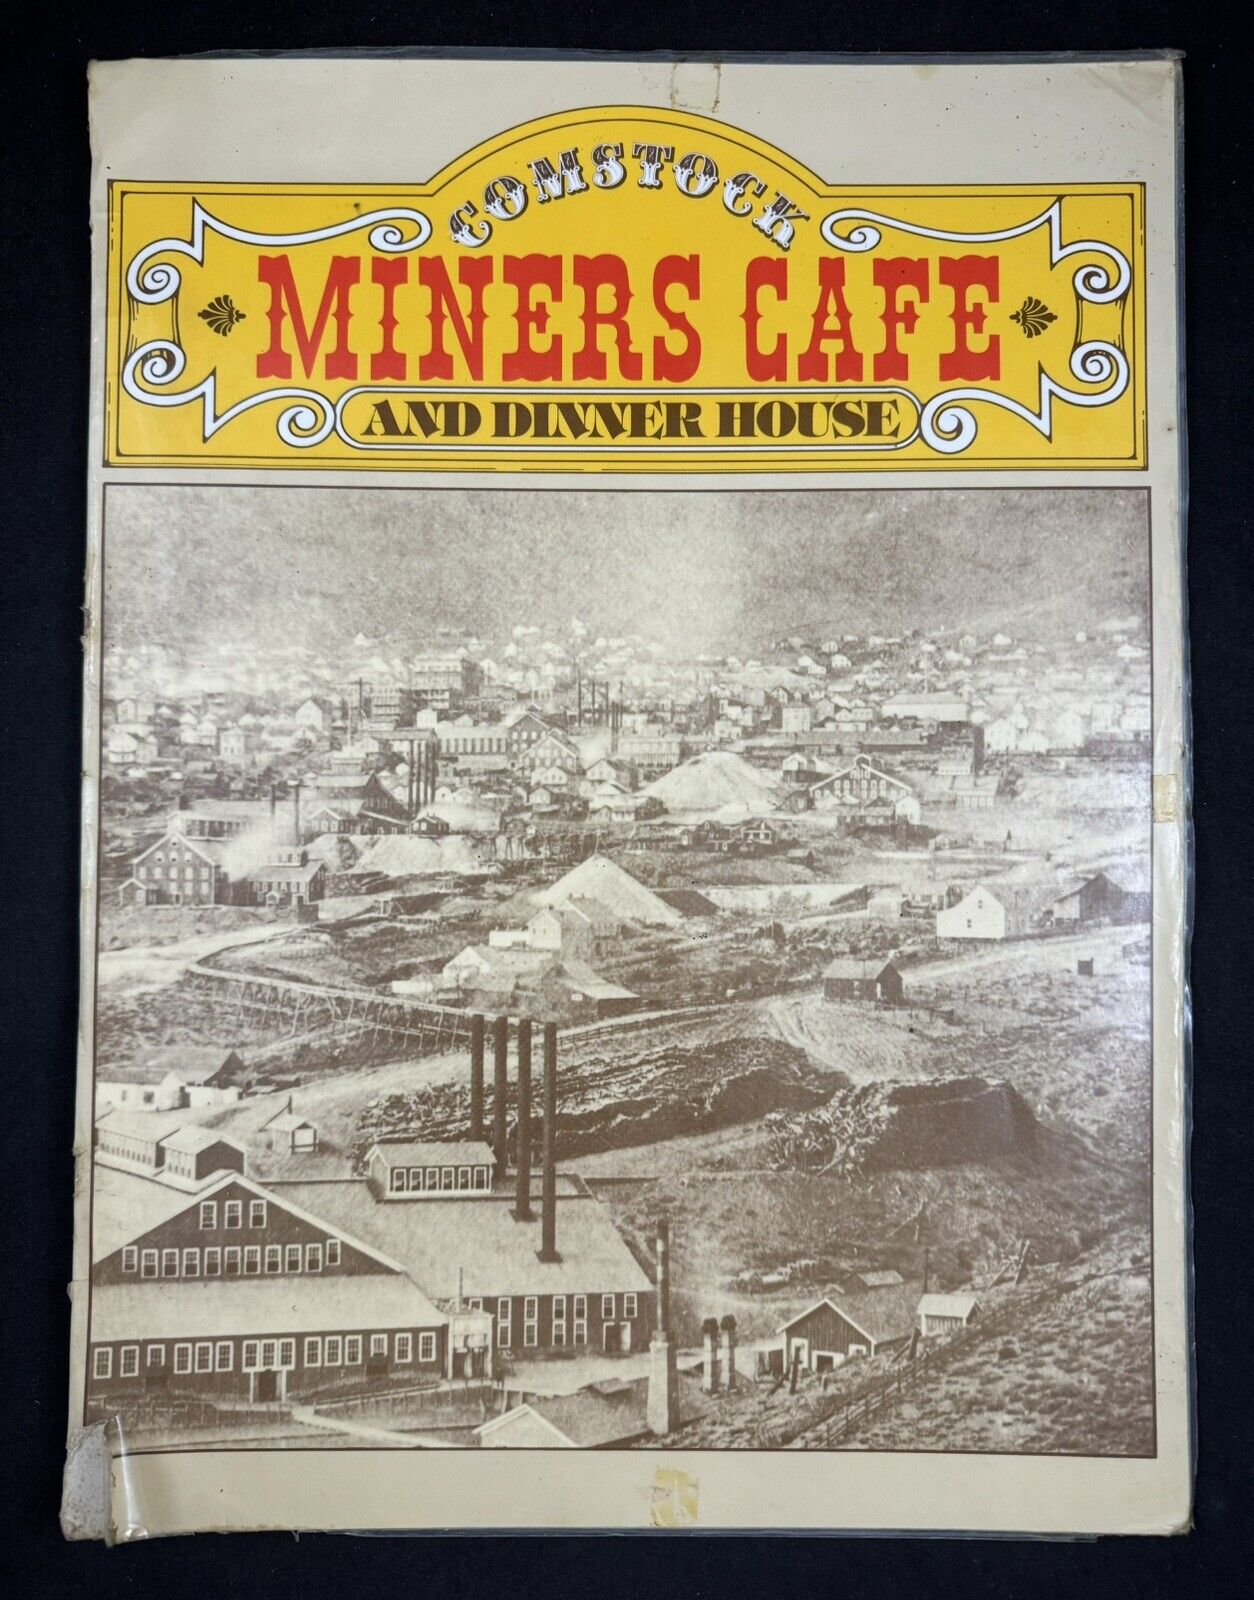 Vintage Comstock Miners Cafe and Dinner House Restaurant Menu